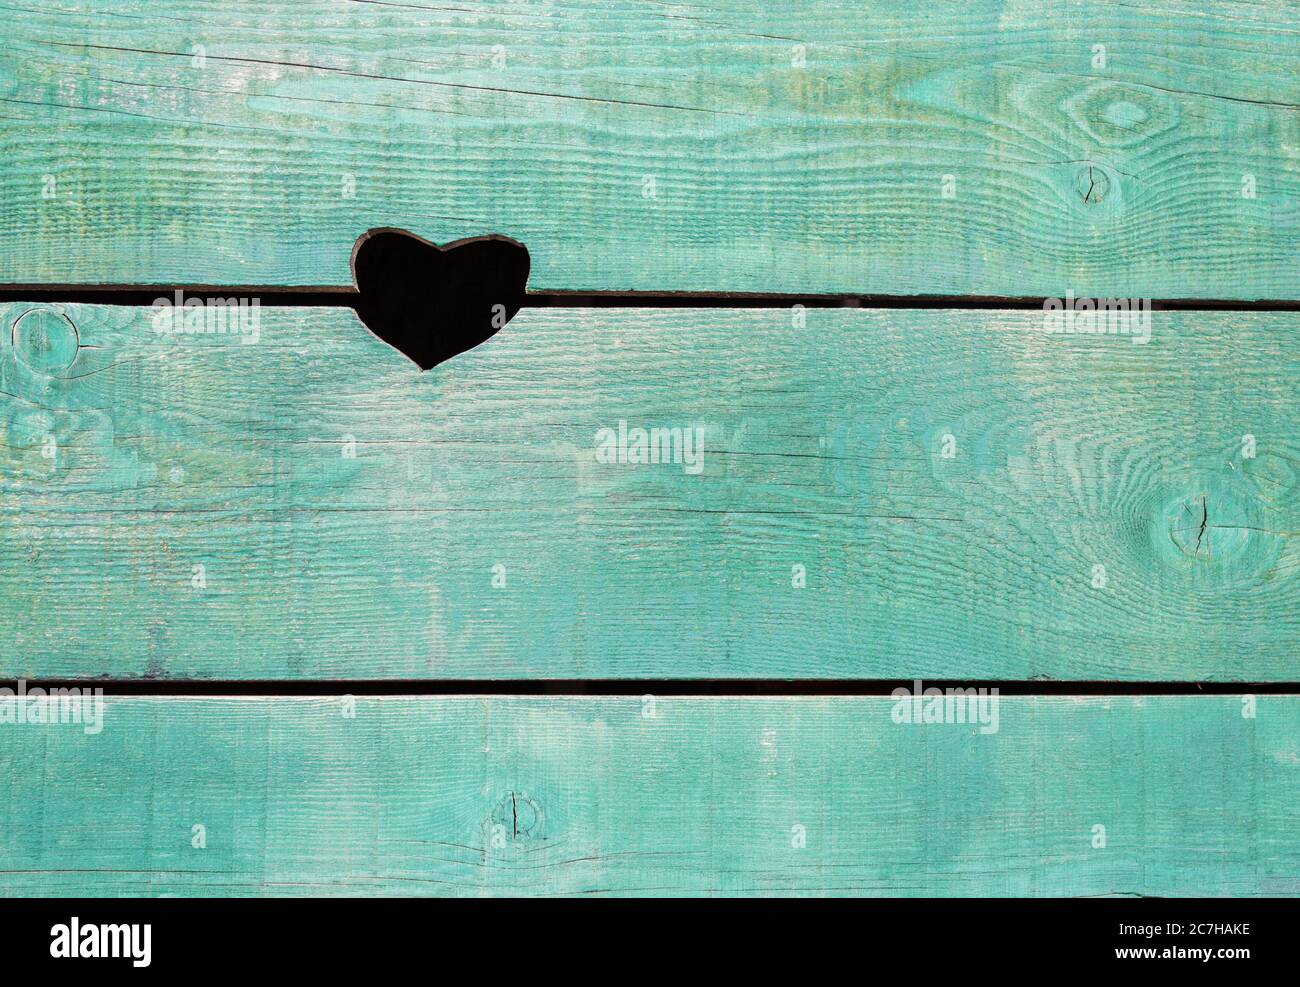 a hole in the shape of a heart in a wooden wall made of old boards painted blue Stock Photo